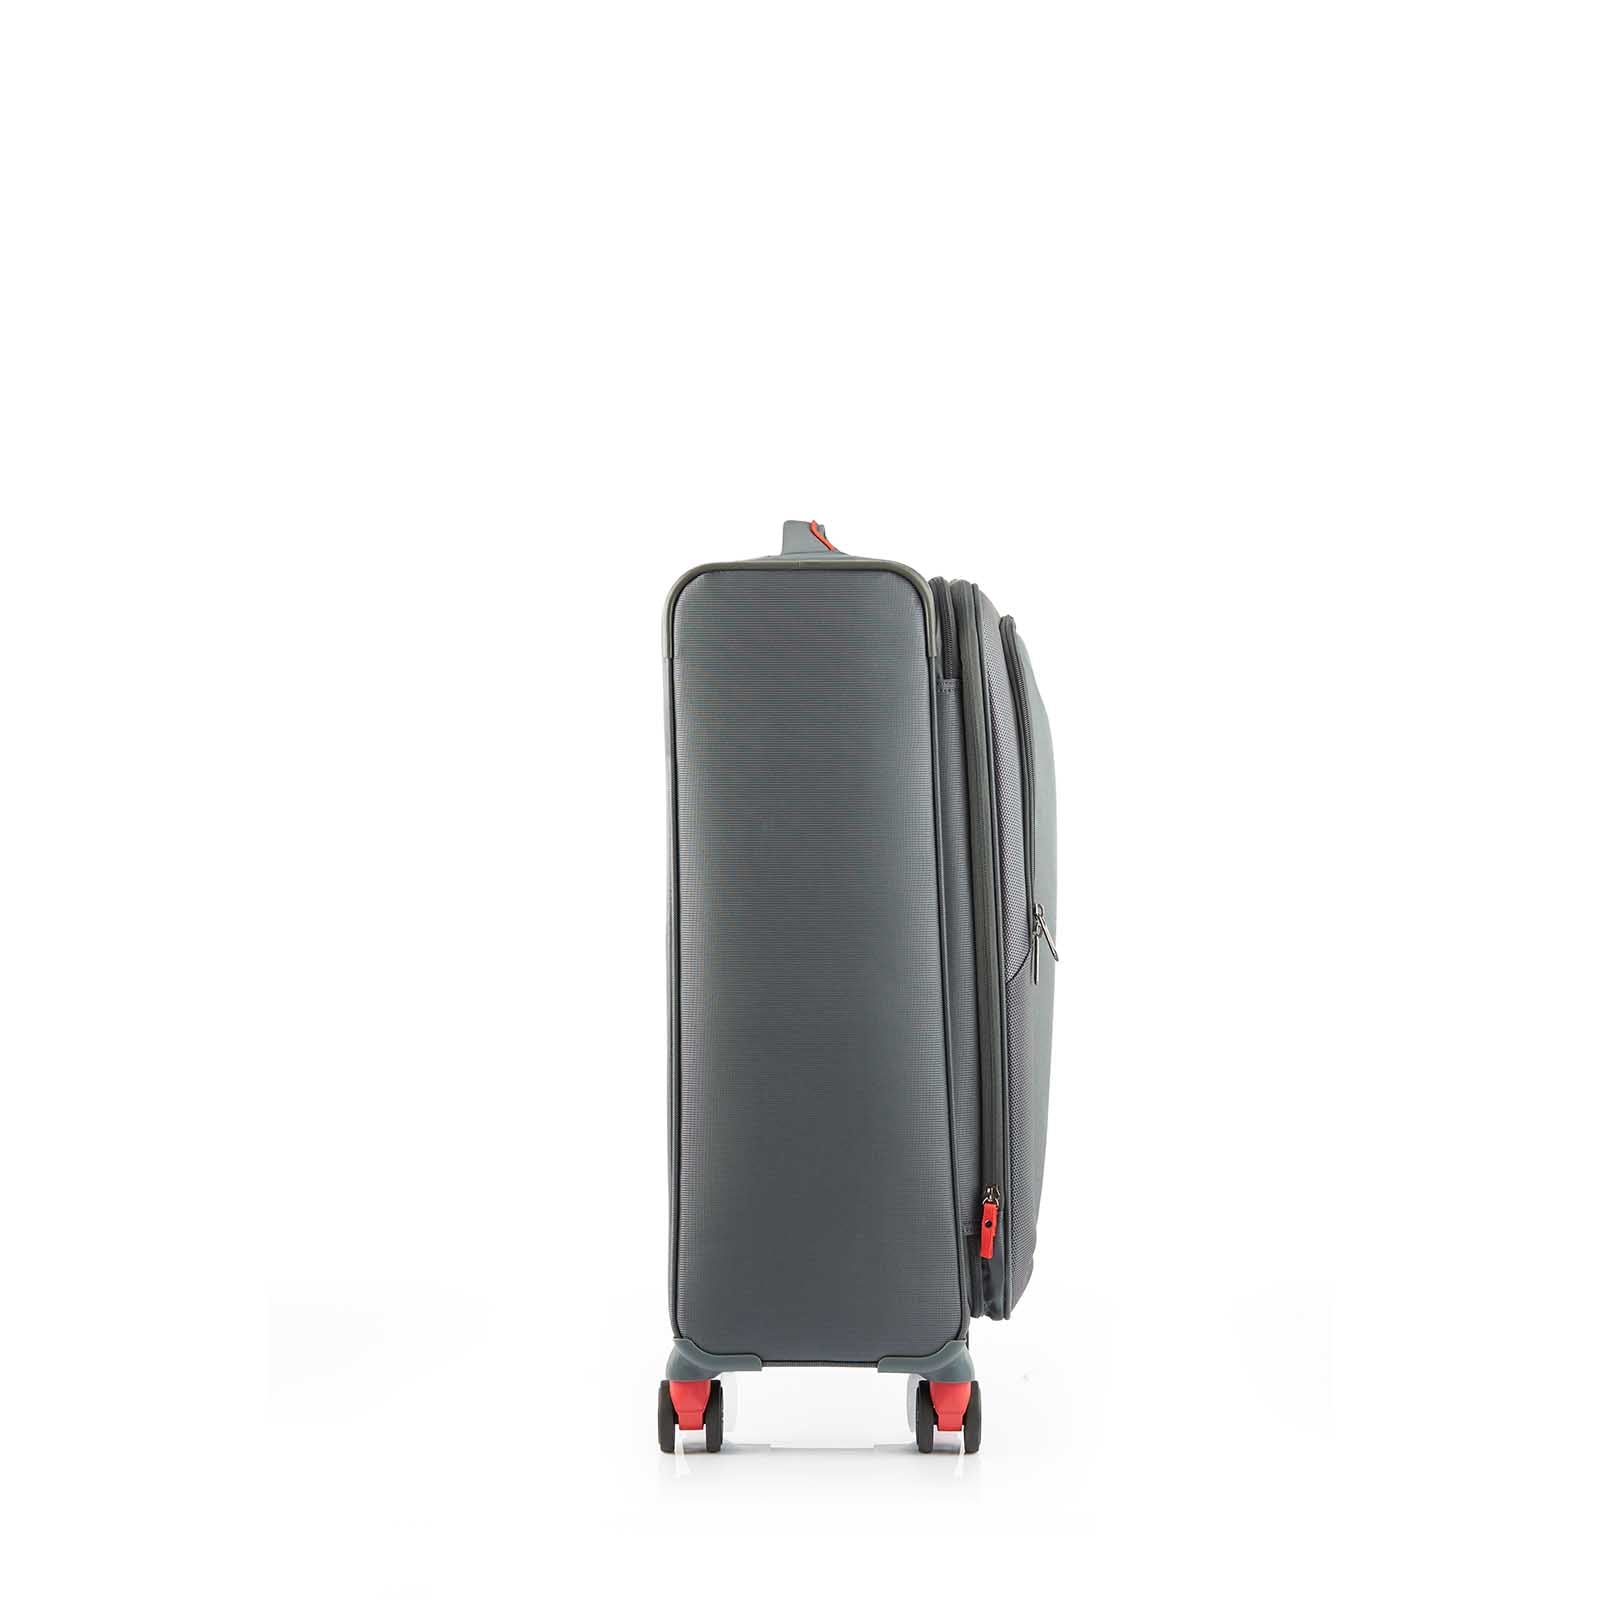 American-Tourister-Applite-4-Eco-71cm-Suitcase-Grey-Red-Side-LH